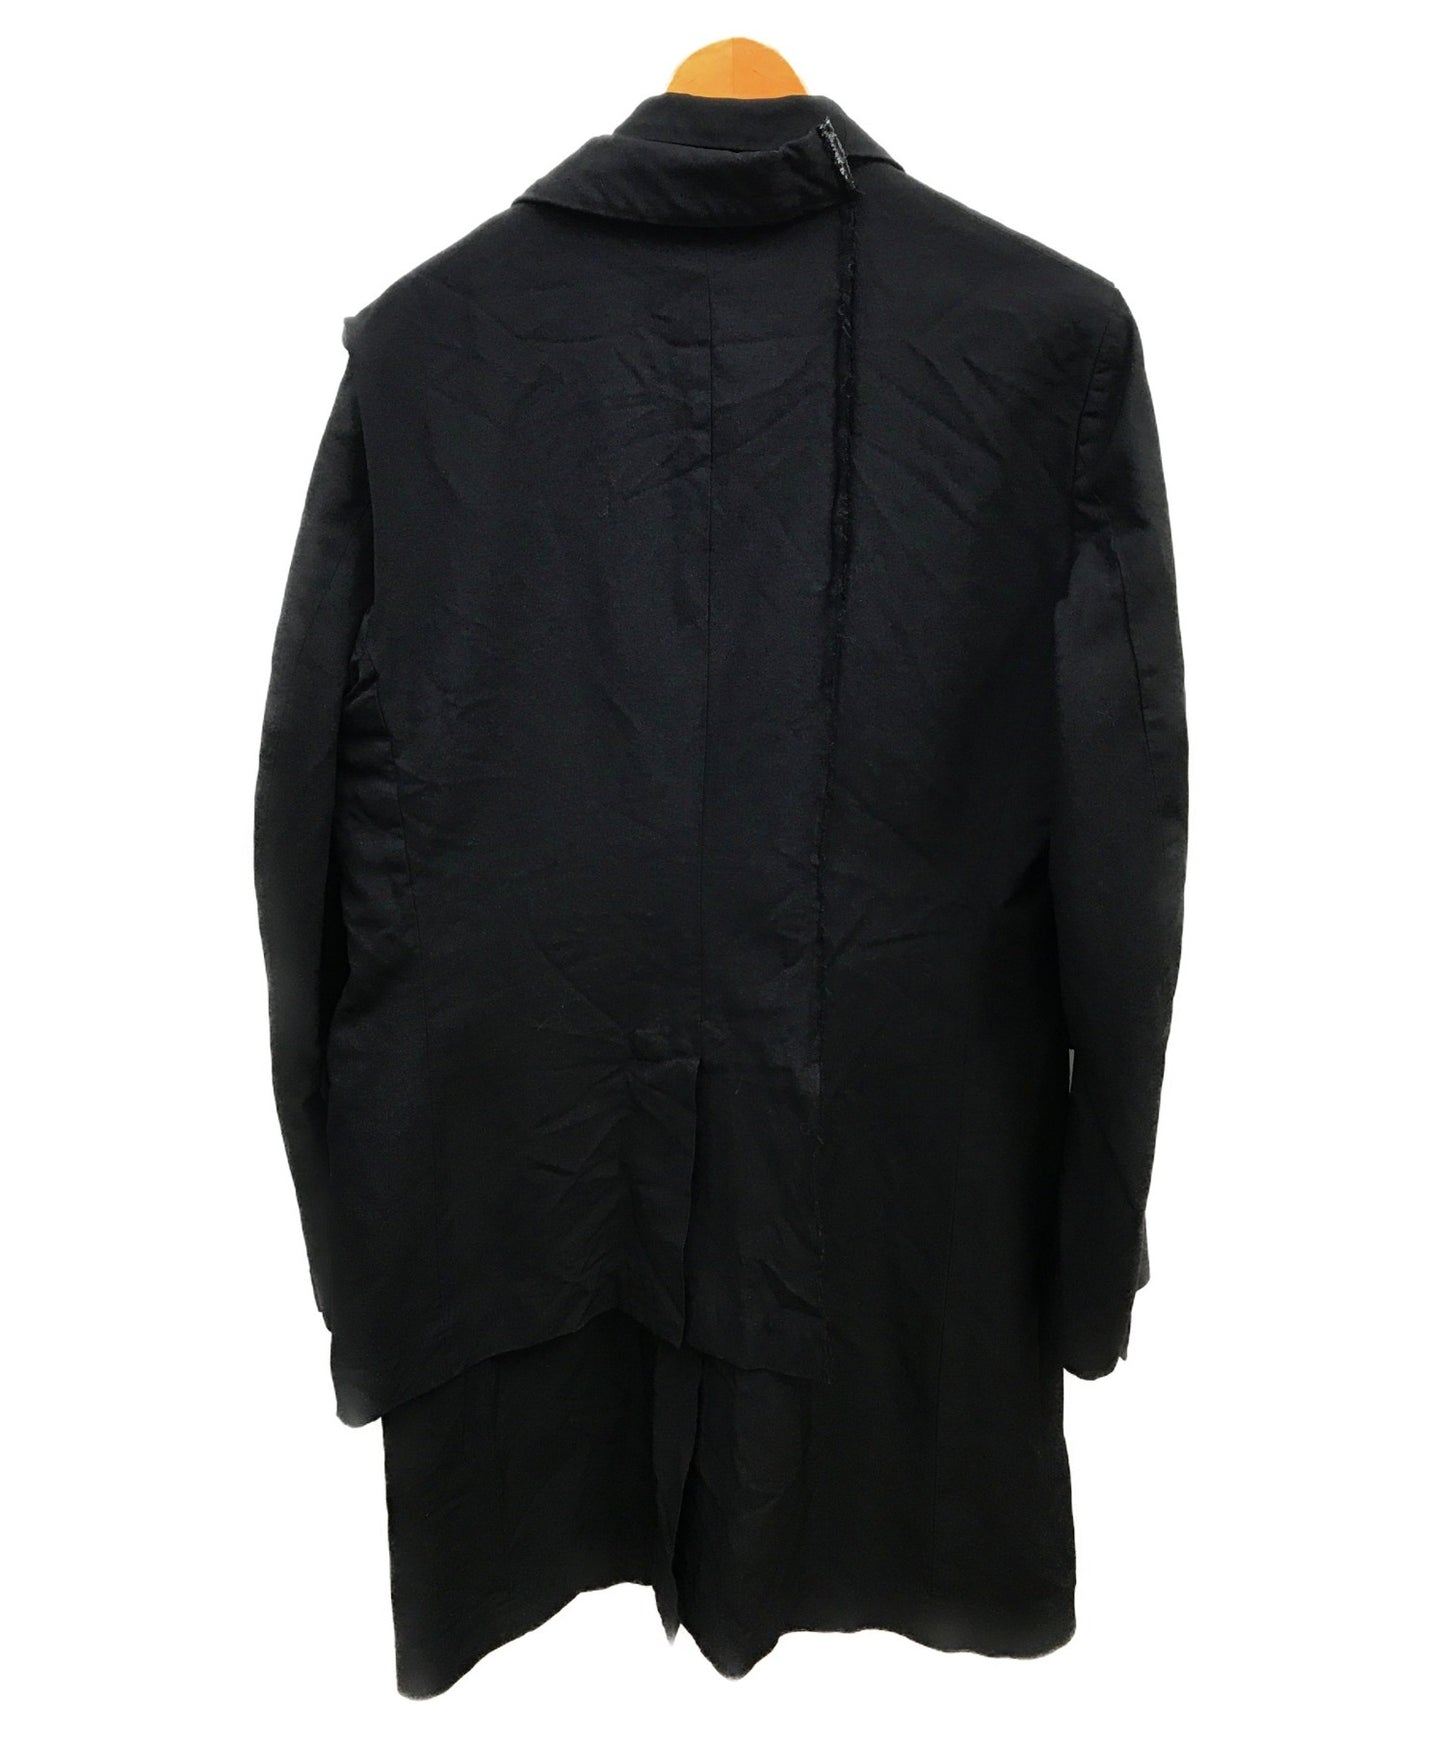 Comme des Garcons Homme Plus Poly Hellink重建Docking双夹克PD-J076 2019AW